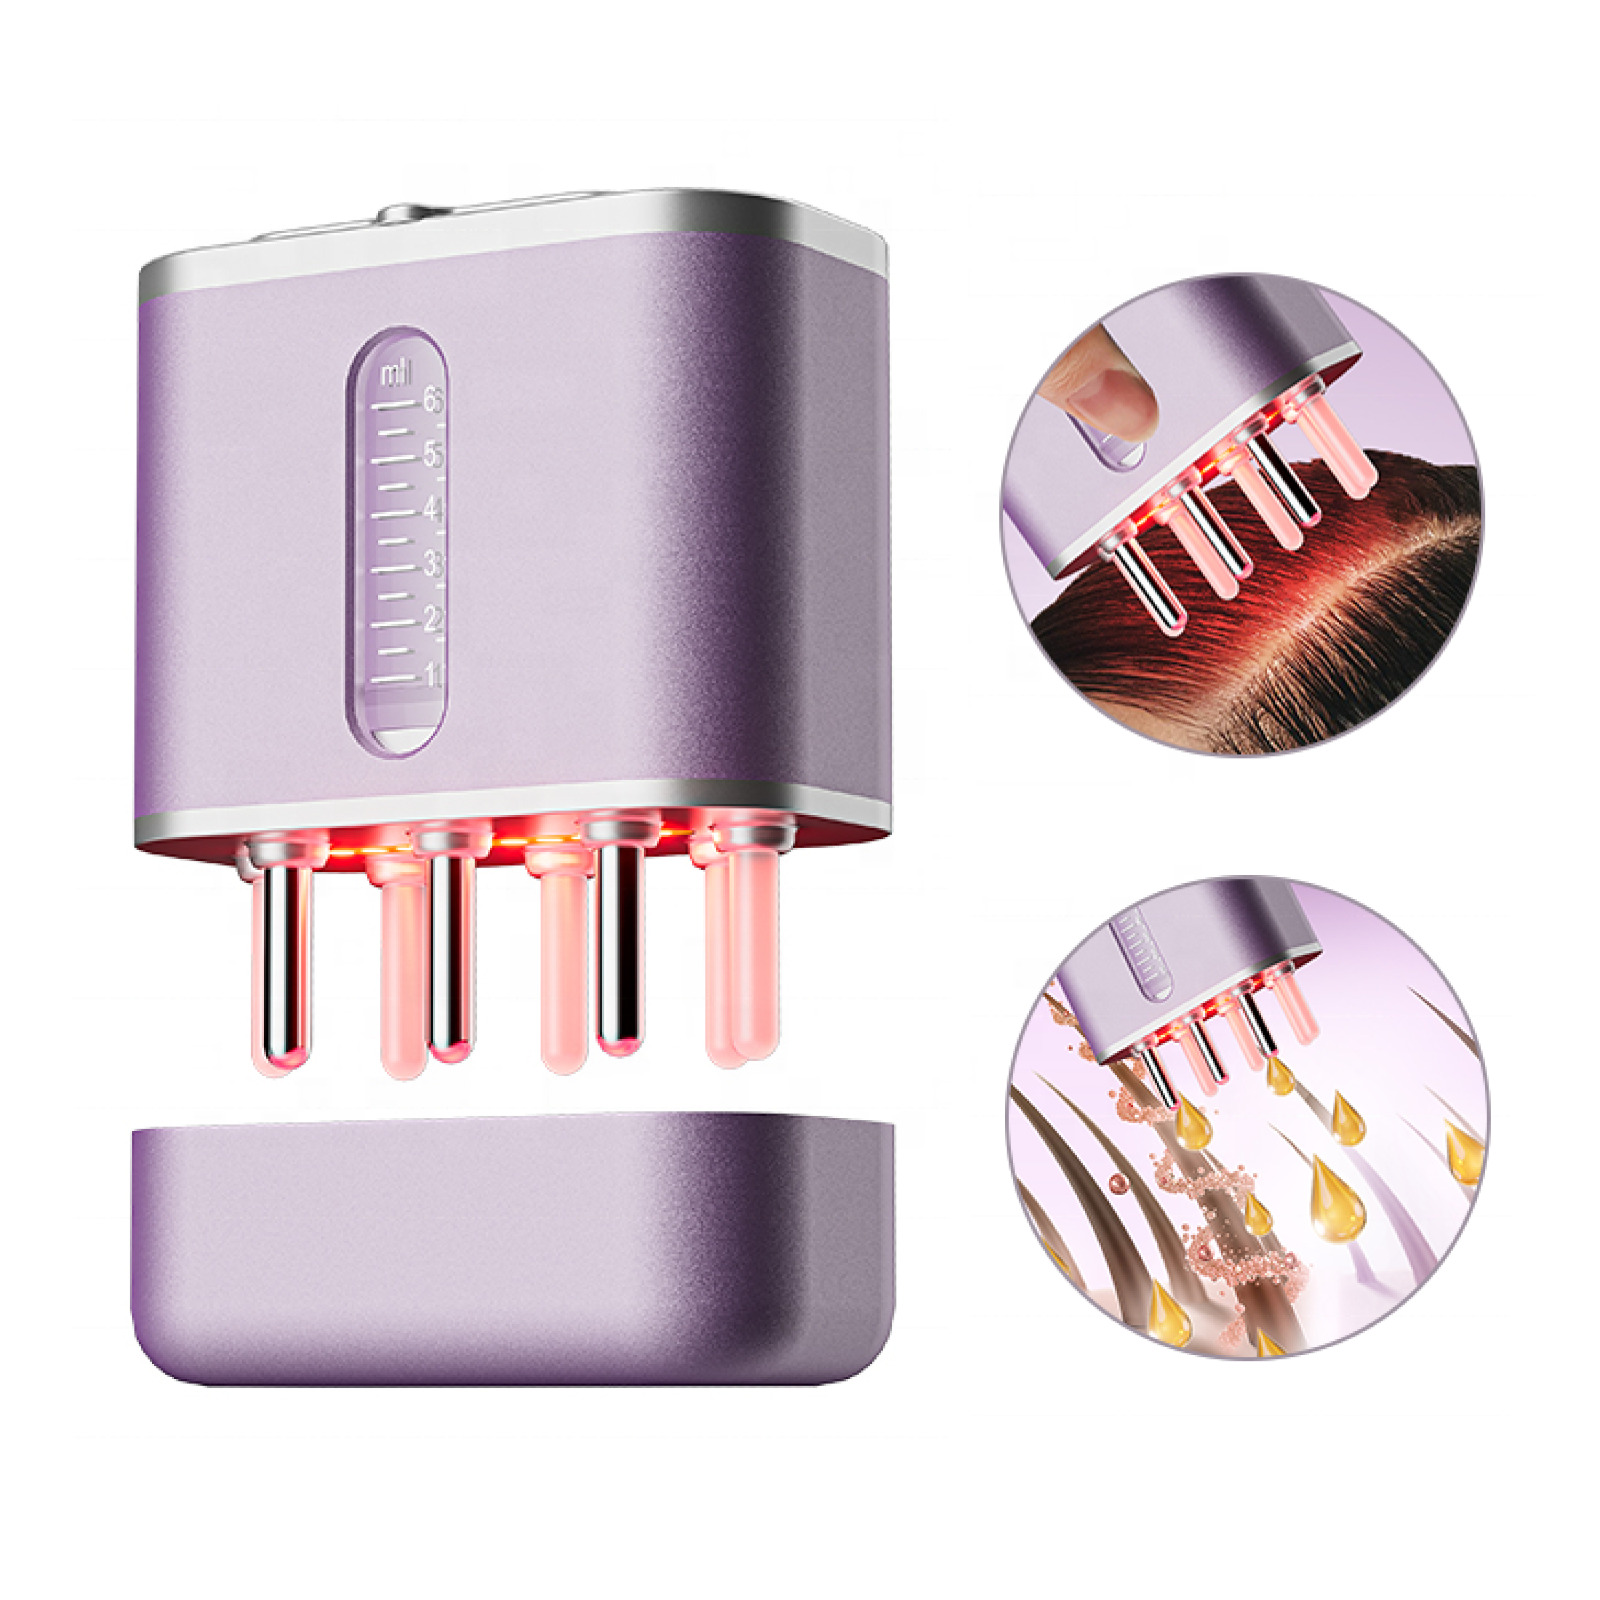 YouDay Hair Oil Applicator for Hair Growth Treatment & Red Light Therapy